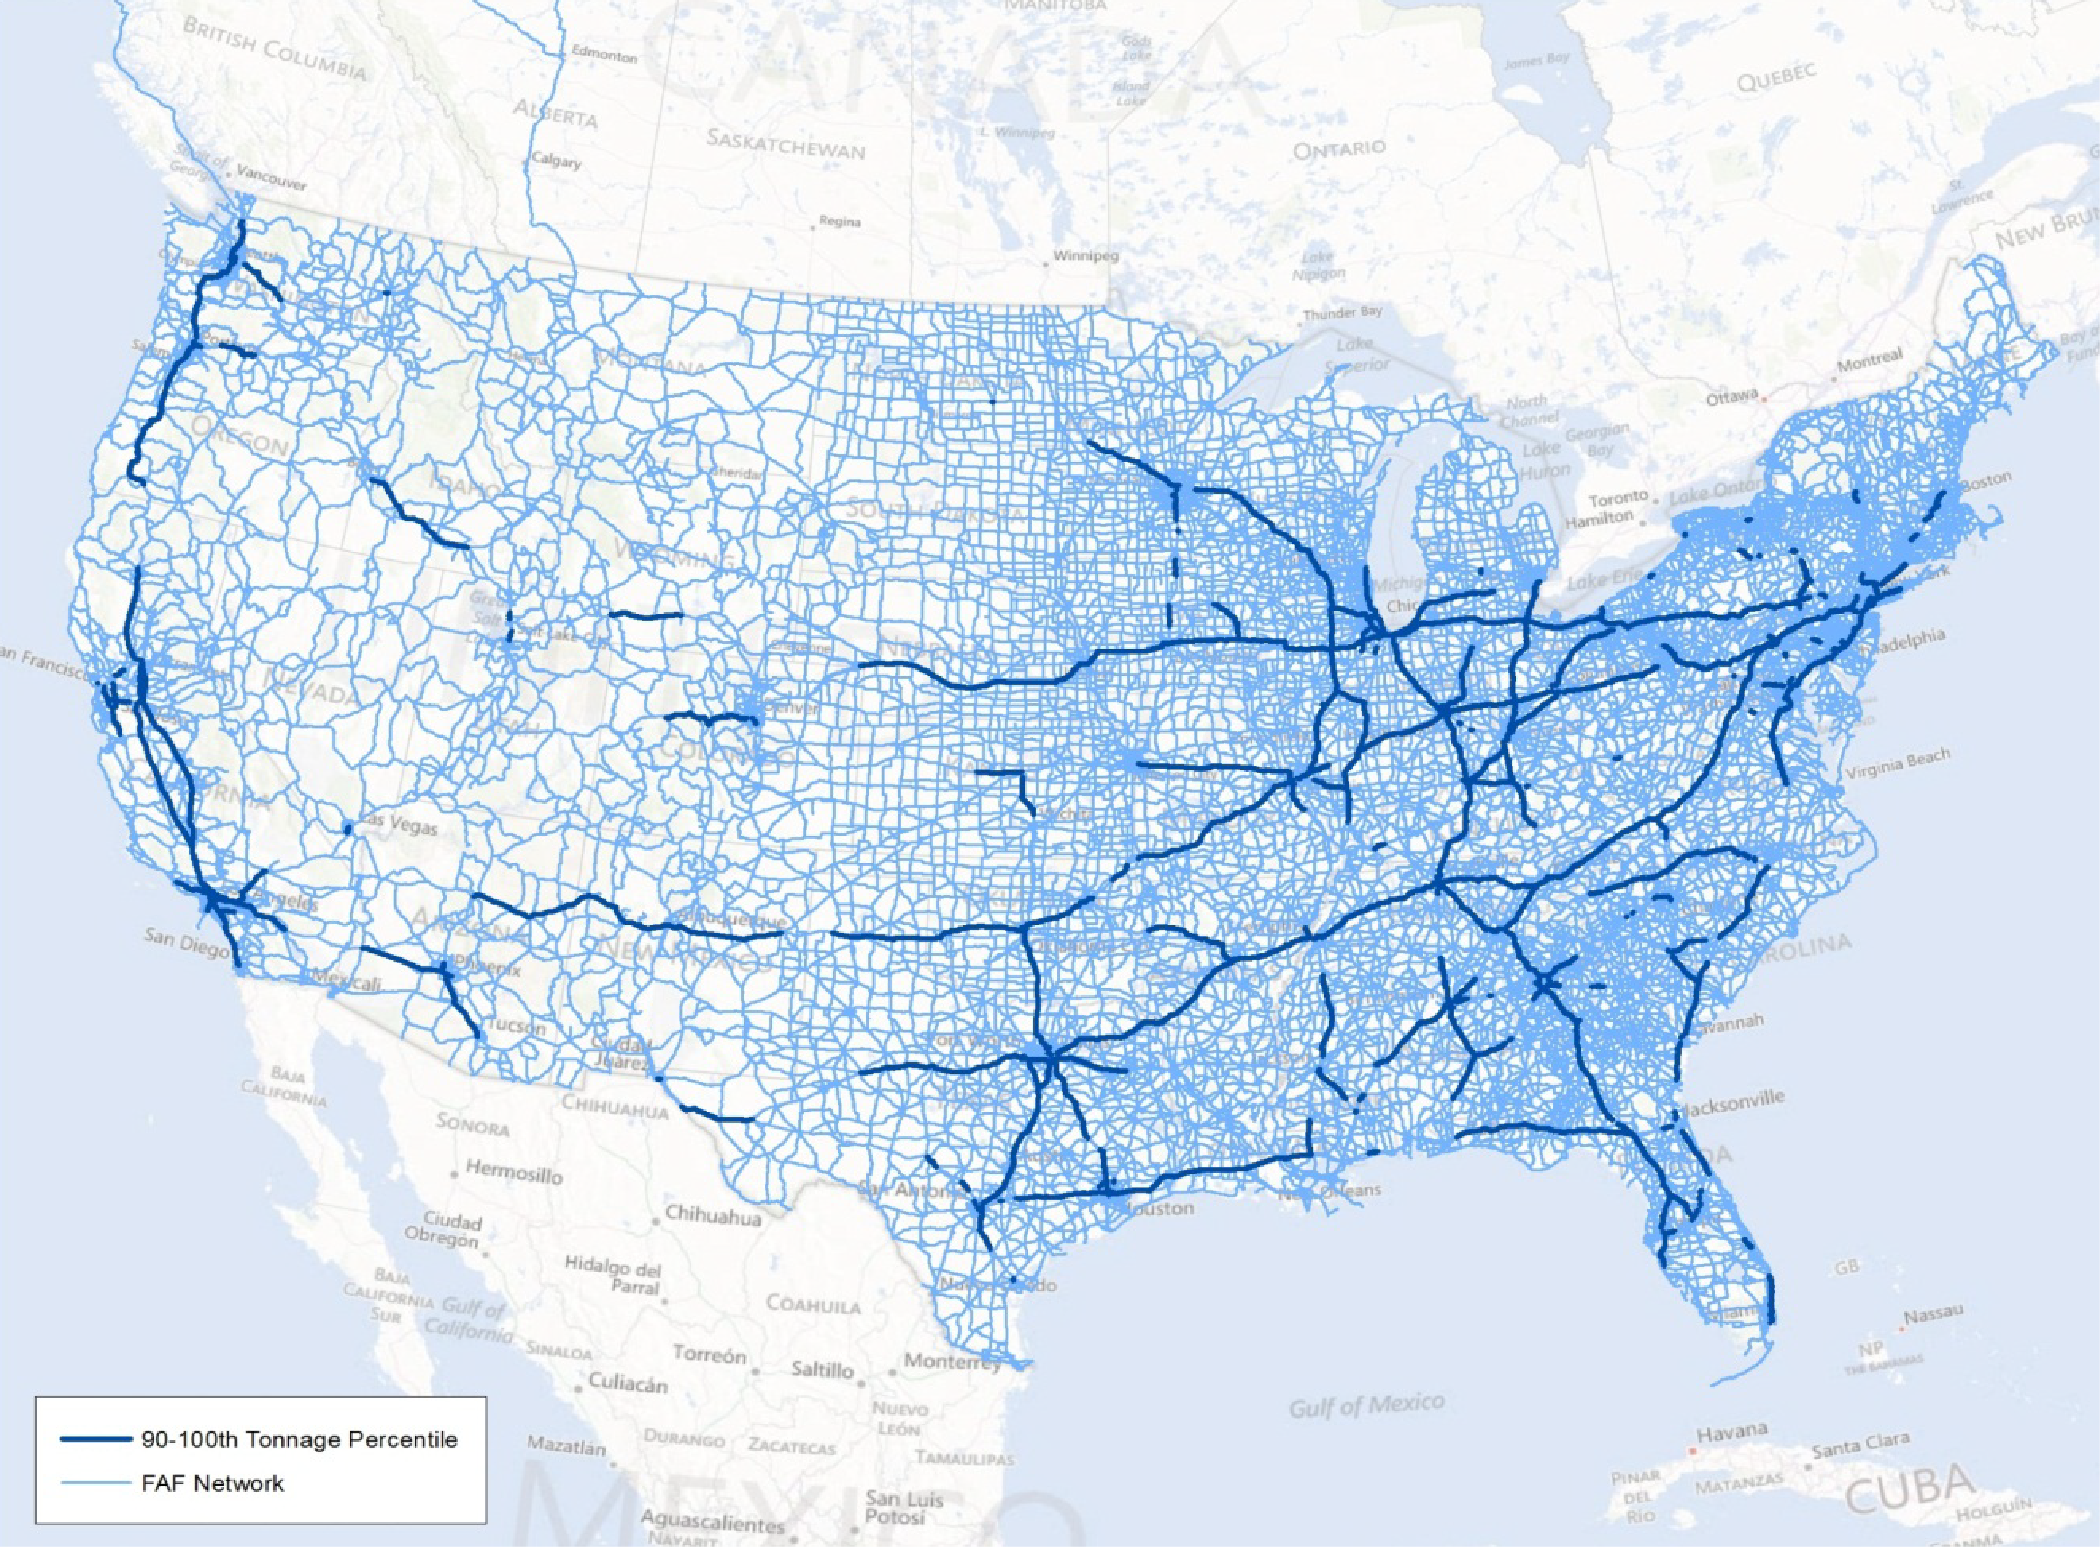 An outline map of the 48 contiguous states shows a freight analysis framework network. The freight analysis framework network routes are indicated by a thin light blue line; highways in the 90 to 100th tonnage percentile are indicated with a thicker dark blue line. The freight transportation network is most extensive in the eastern half of the United States, particularly in the northeast and around Georgia. It becomes less dense moving west. Similarly, highways in the 90 to 100th tonnage percentile are most dominant in the eastern United States, becoming less prominent in the Great Plains, and arising again on the west coast from California to Washington. Source: FHWA Freight Management and Operations, Freight Analysis Framework and Freight Performance Measure Program, 2014.